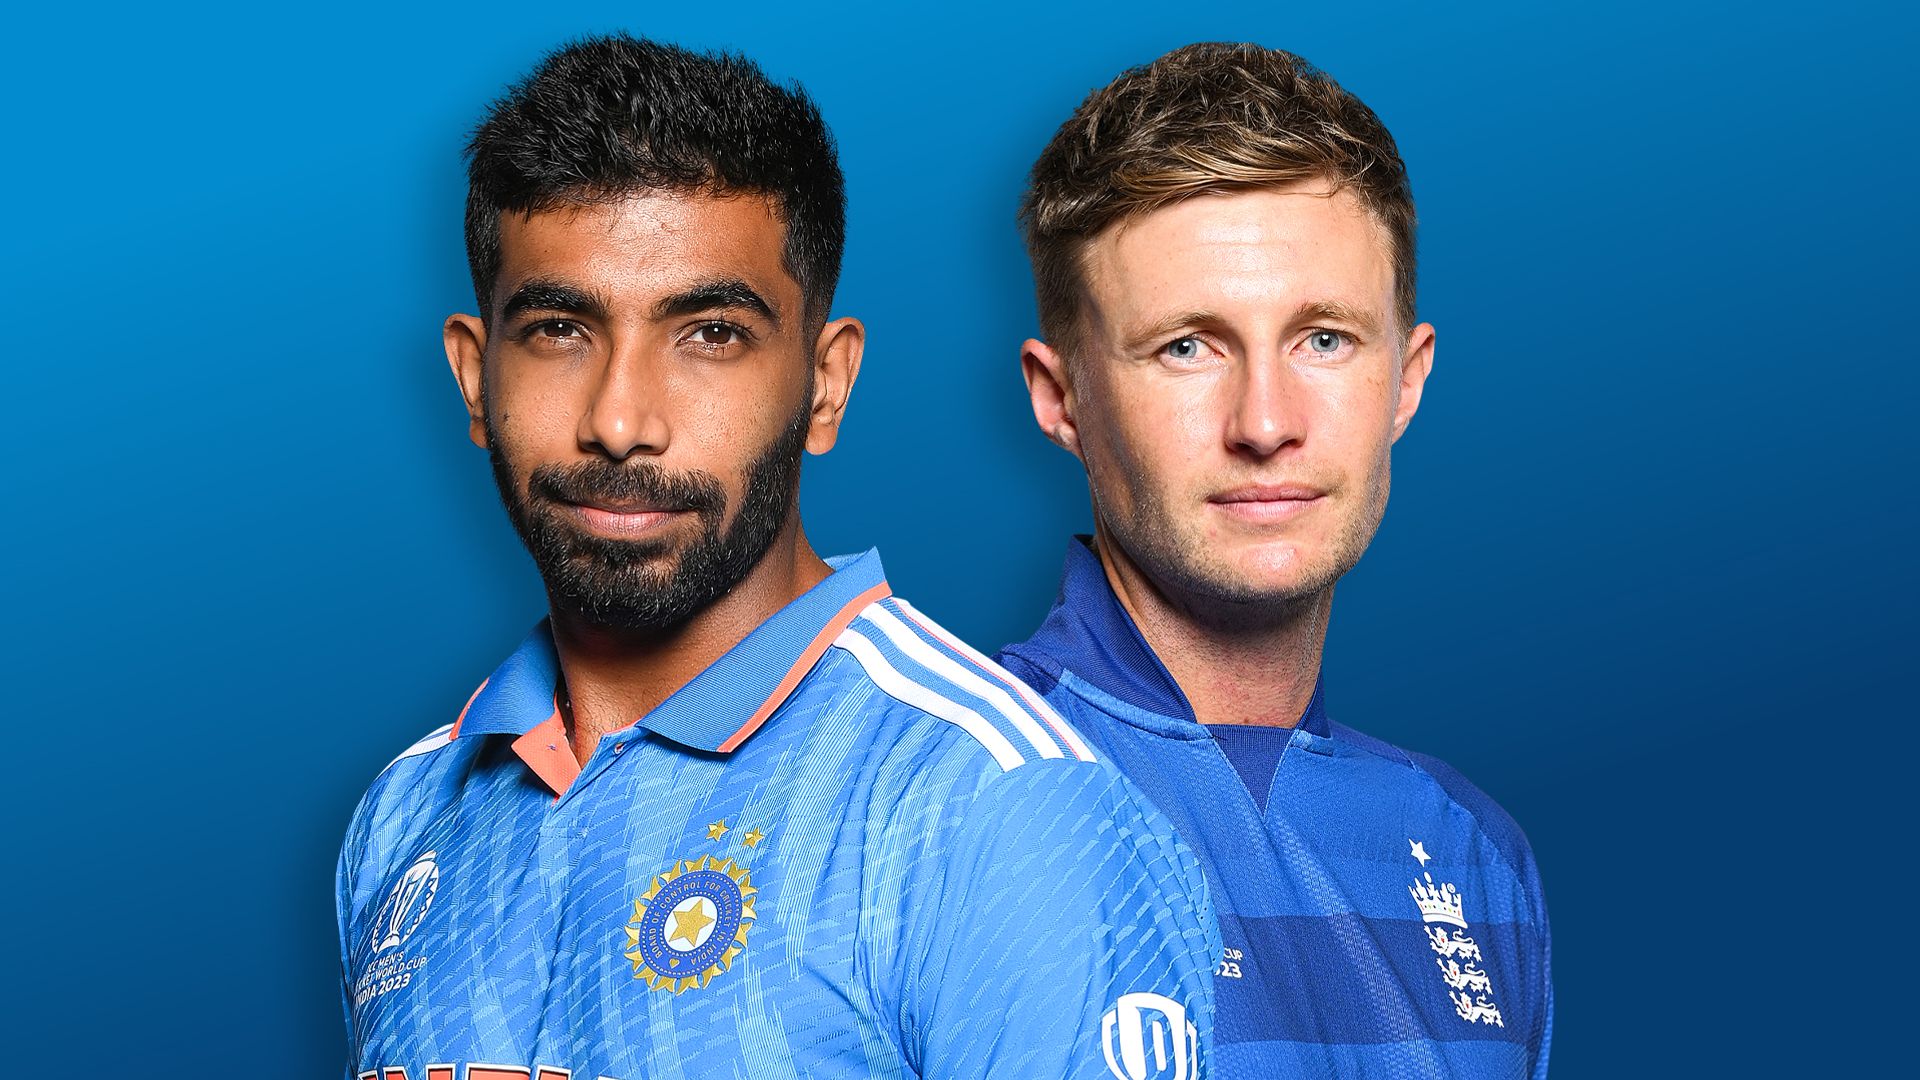 Cricket World Cup: England take on India in must-win match LIVE!